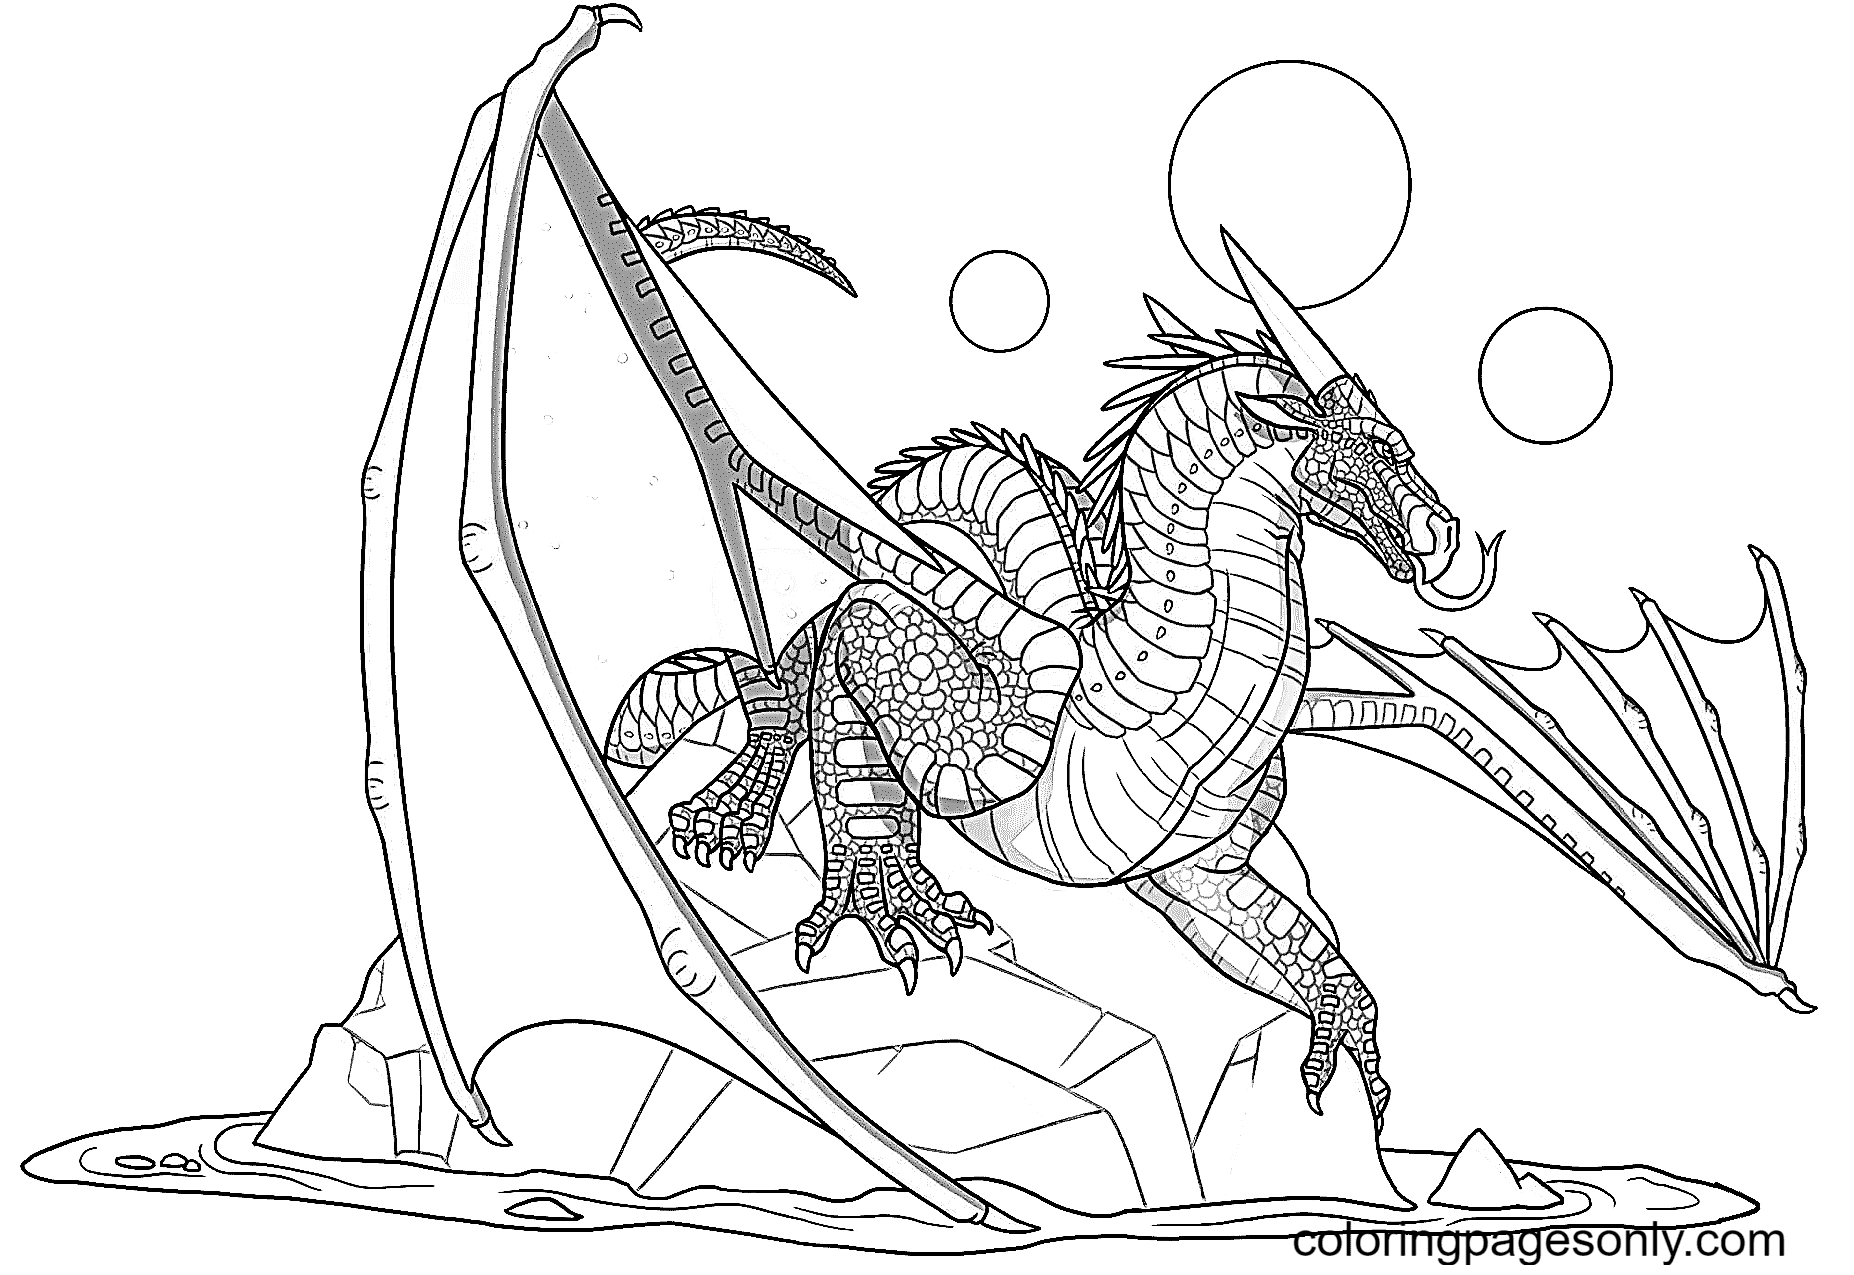 Seawing Dragon with Sharks Coloring Pages - Wings Of Fire Coloring Pages - Coloring  Pages For Kids And Adults